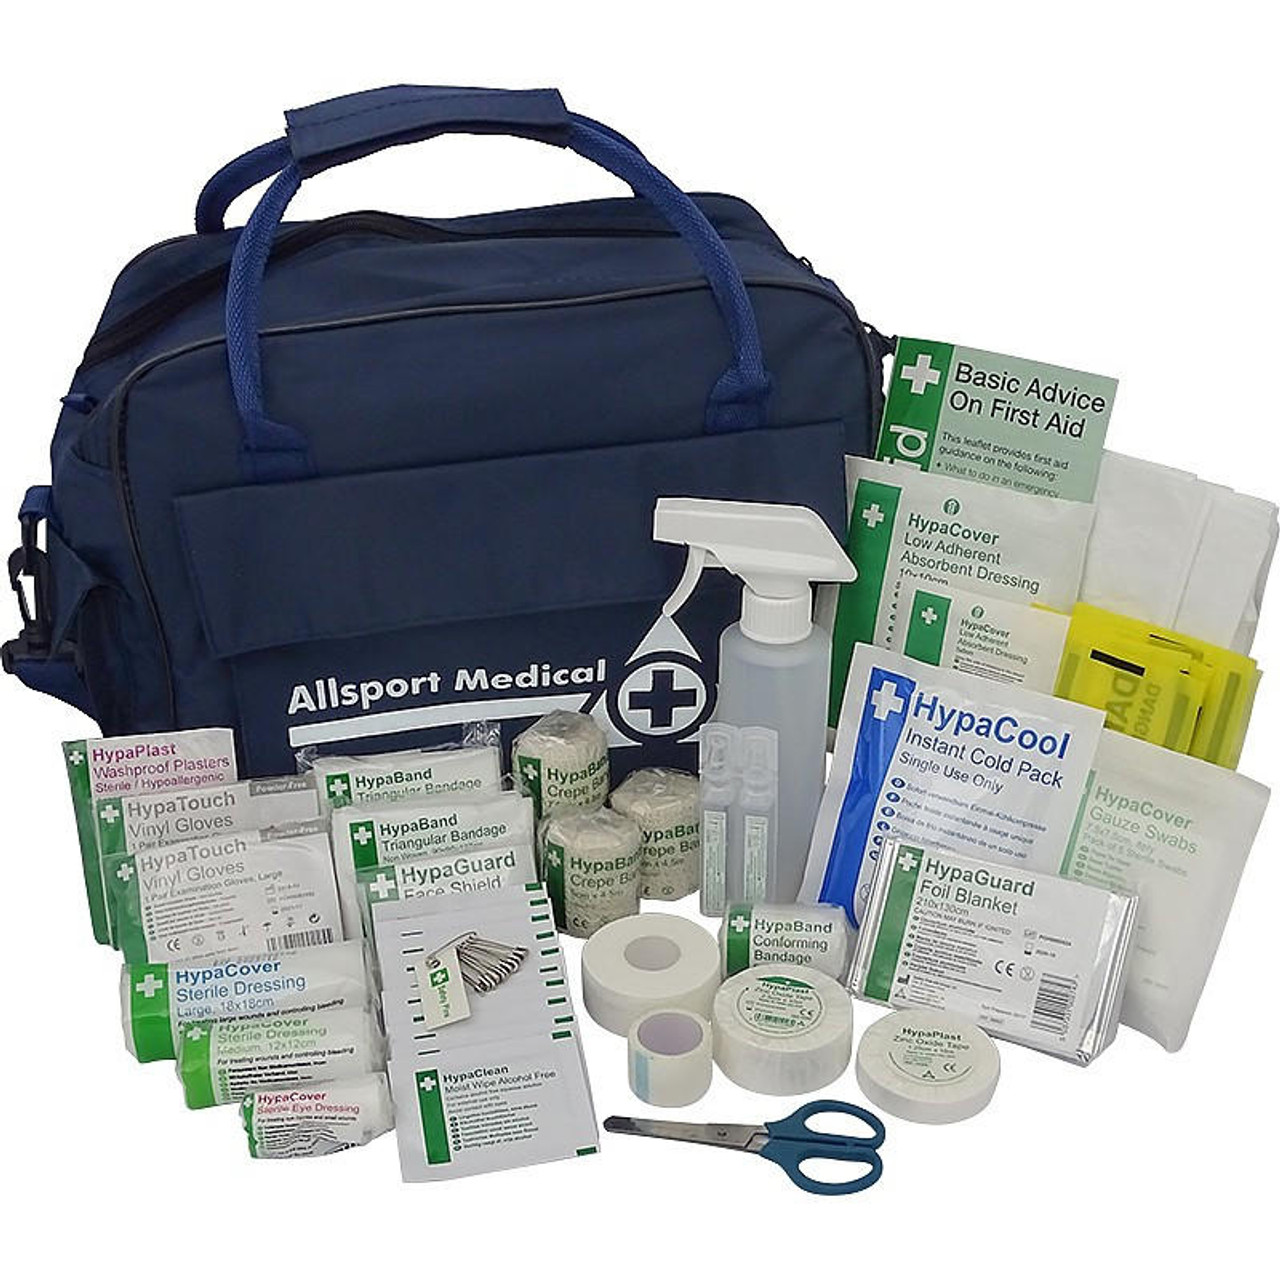 Zafety Rugby First Aid Kit in Run on Medical Bag With Shoulder Strap 